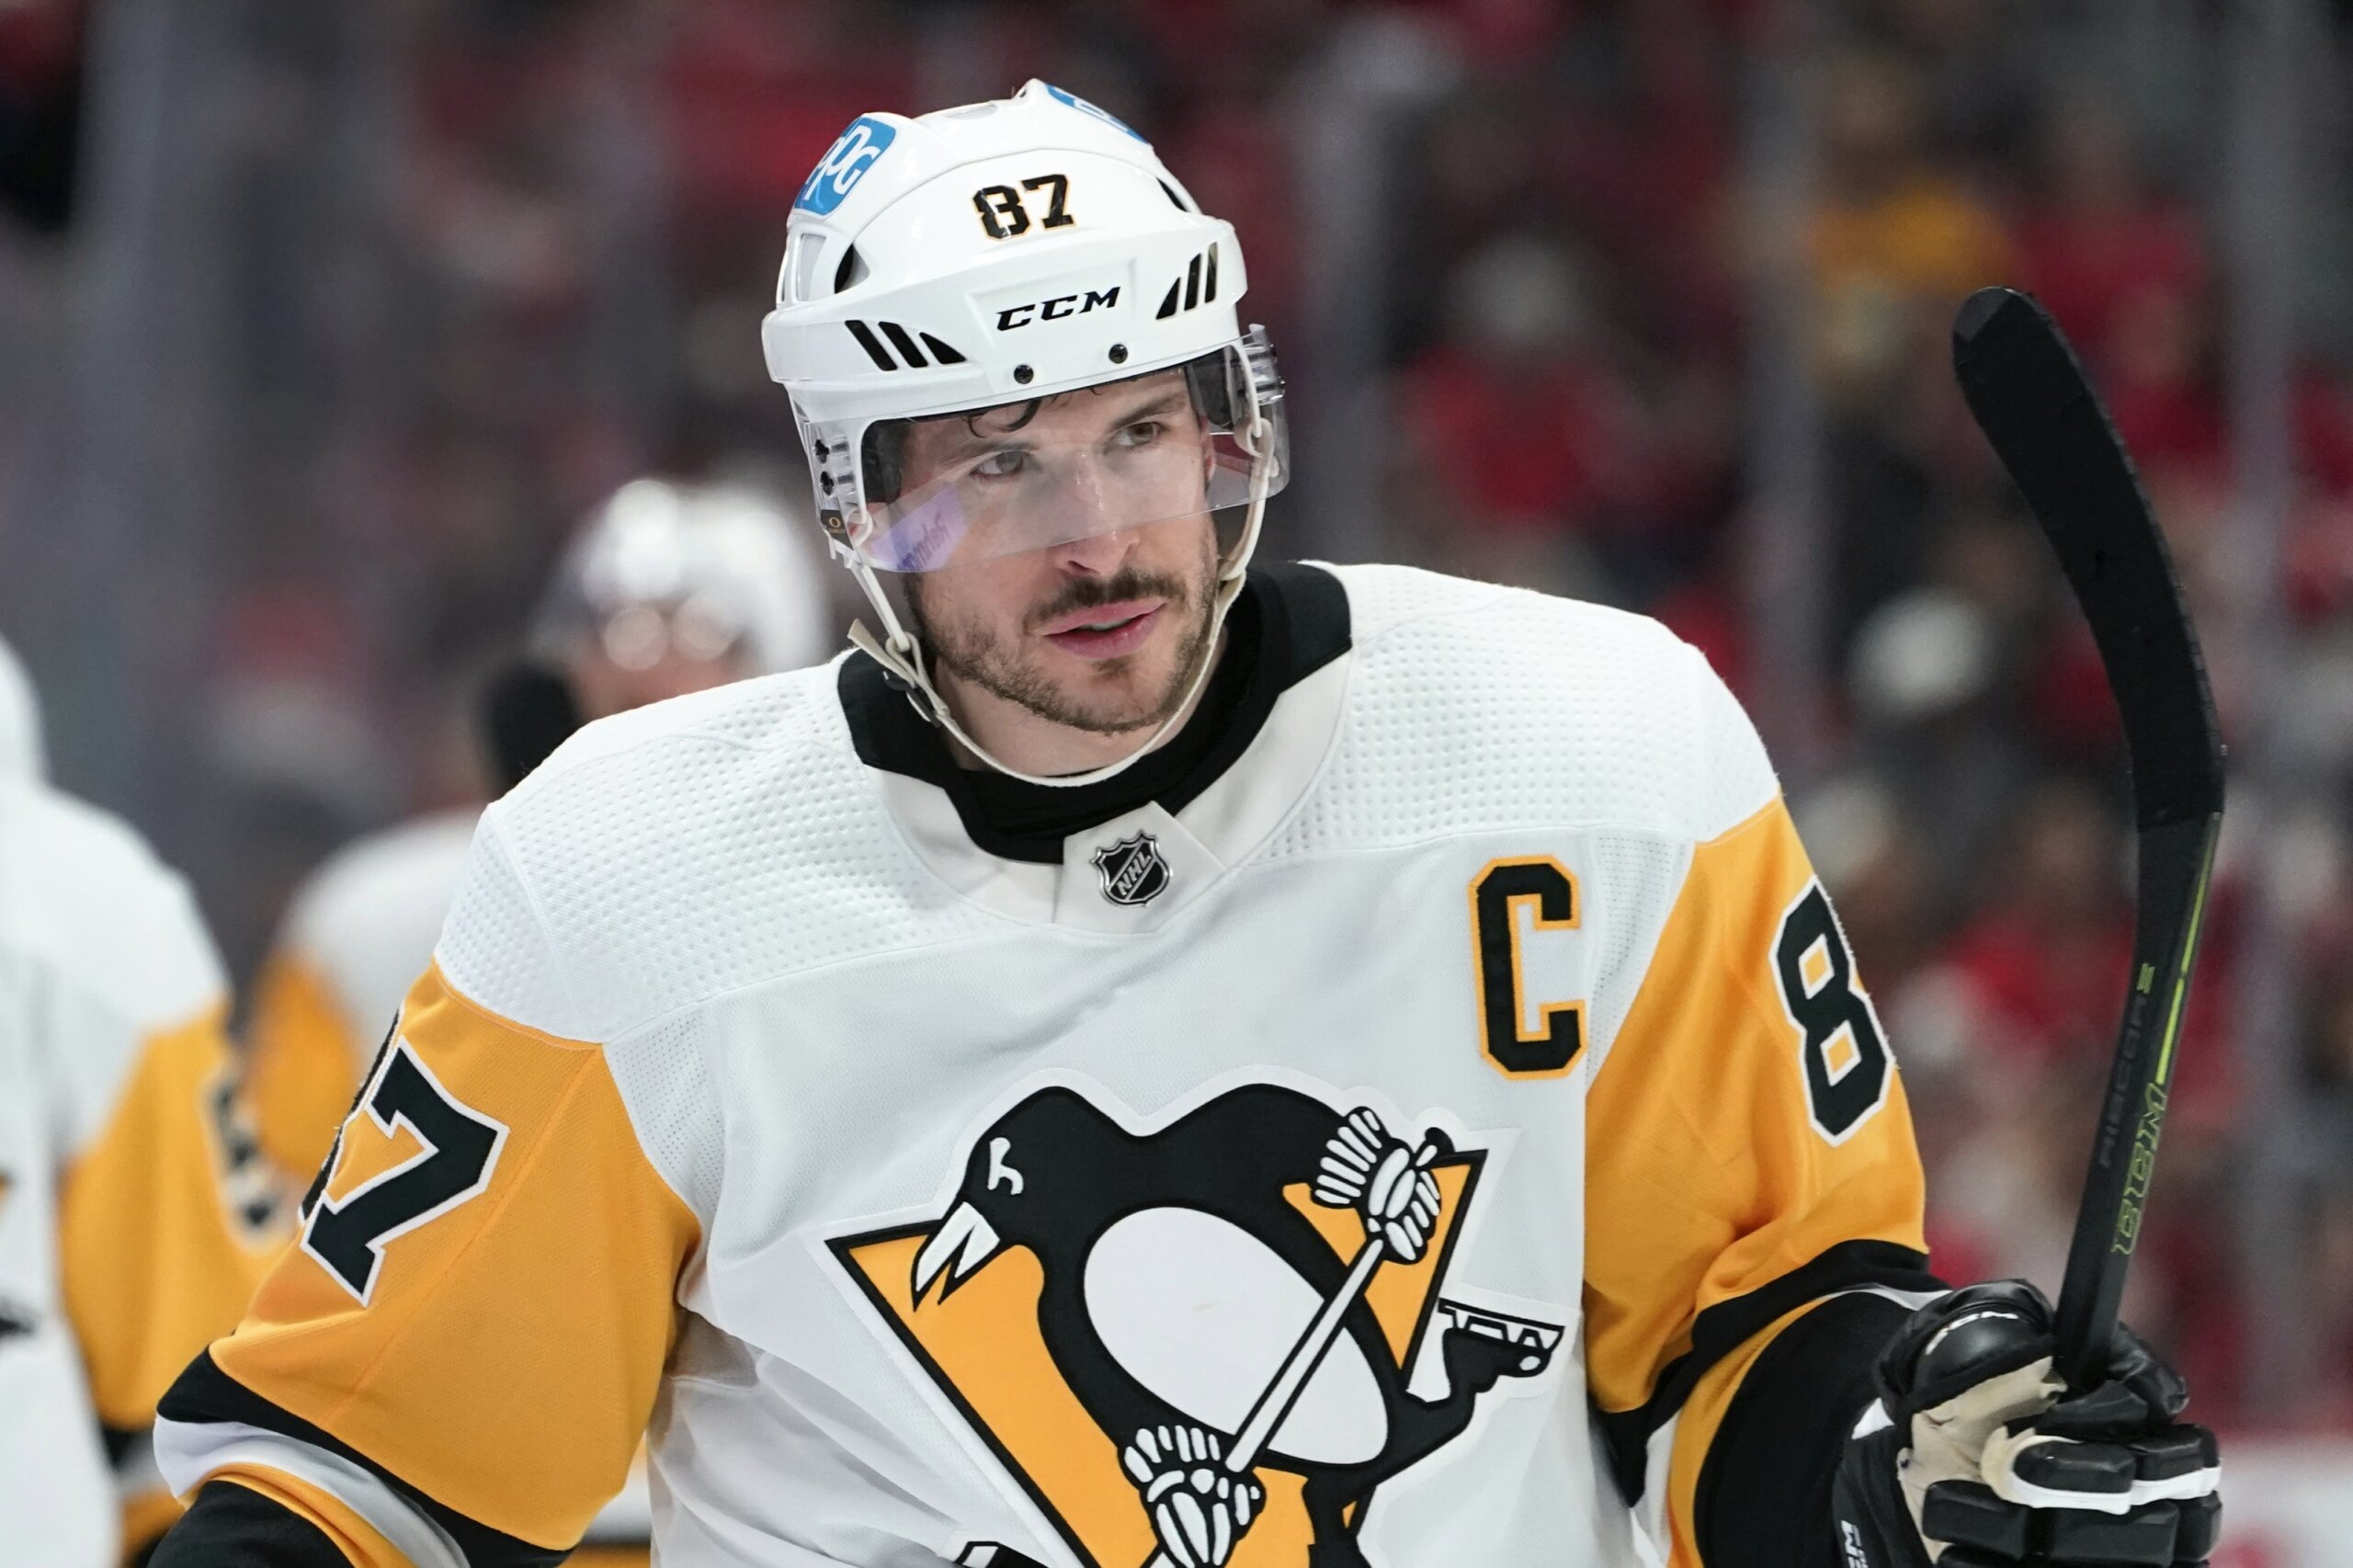 Sidney Crosby picks up his first game misconduct